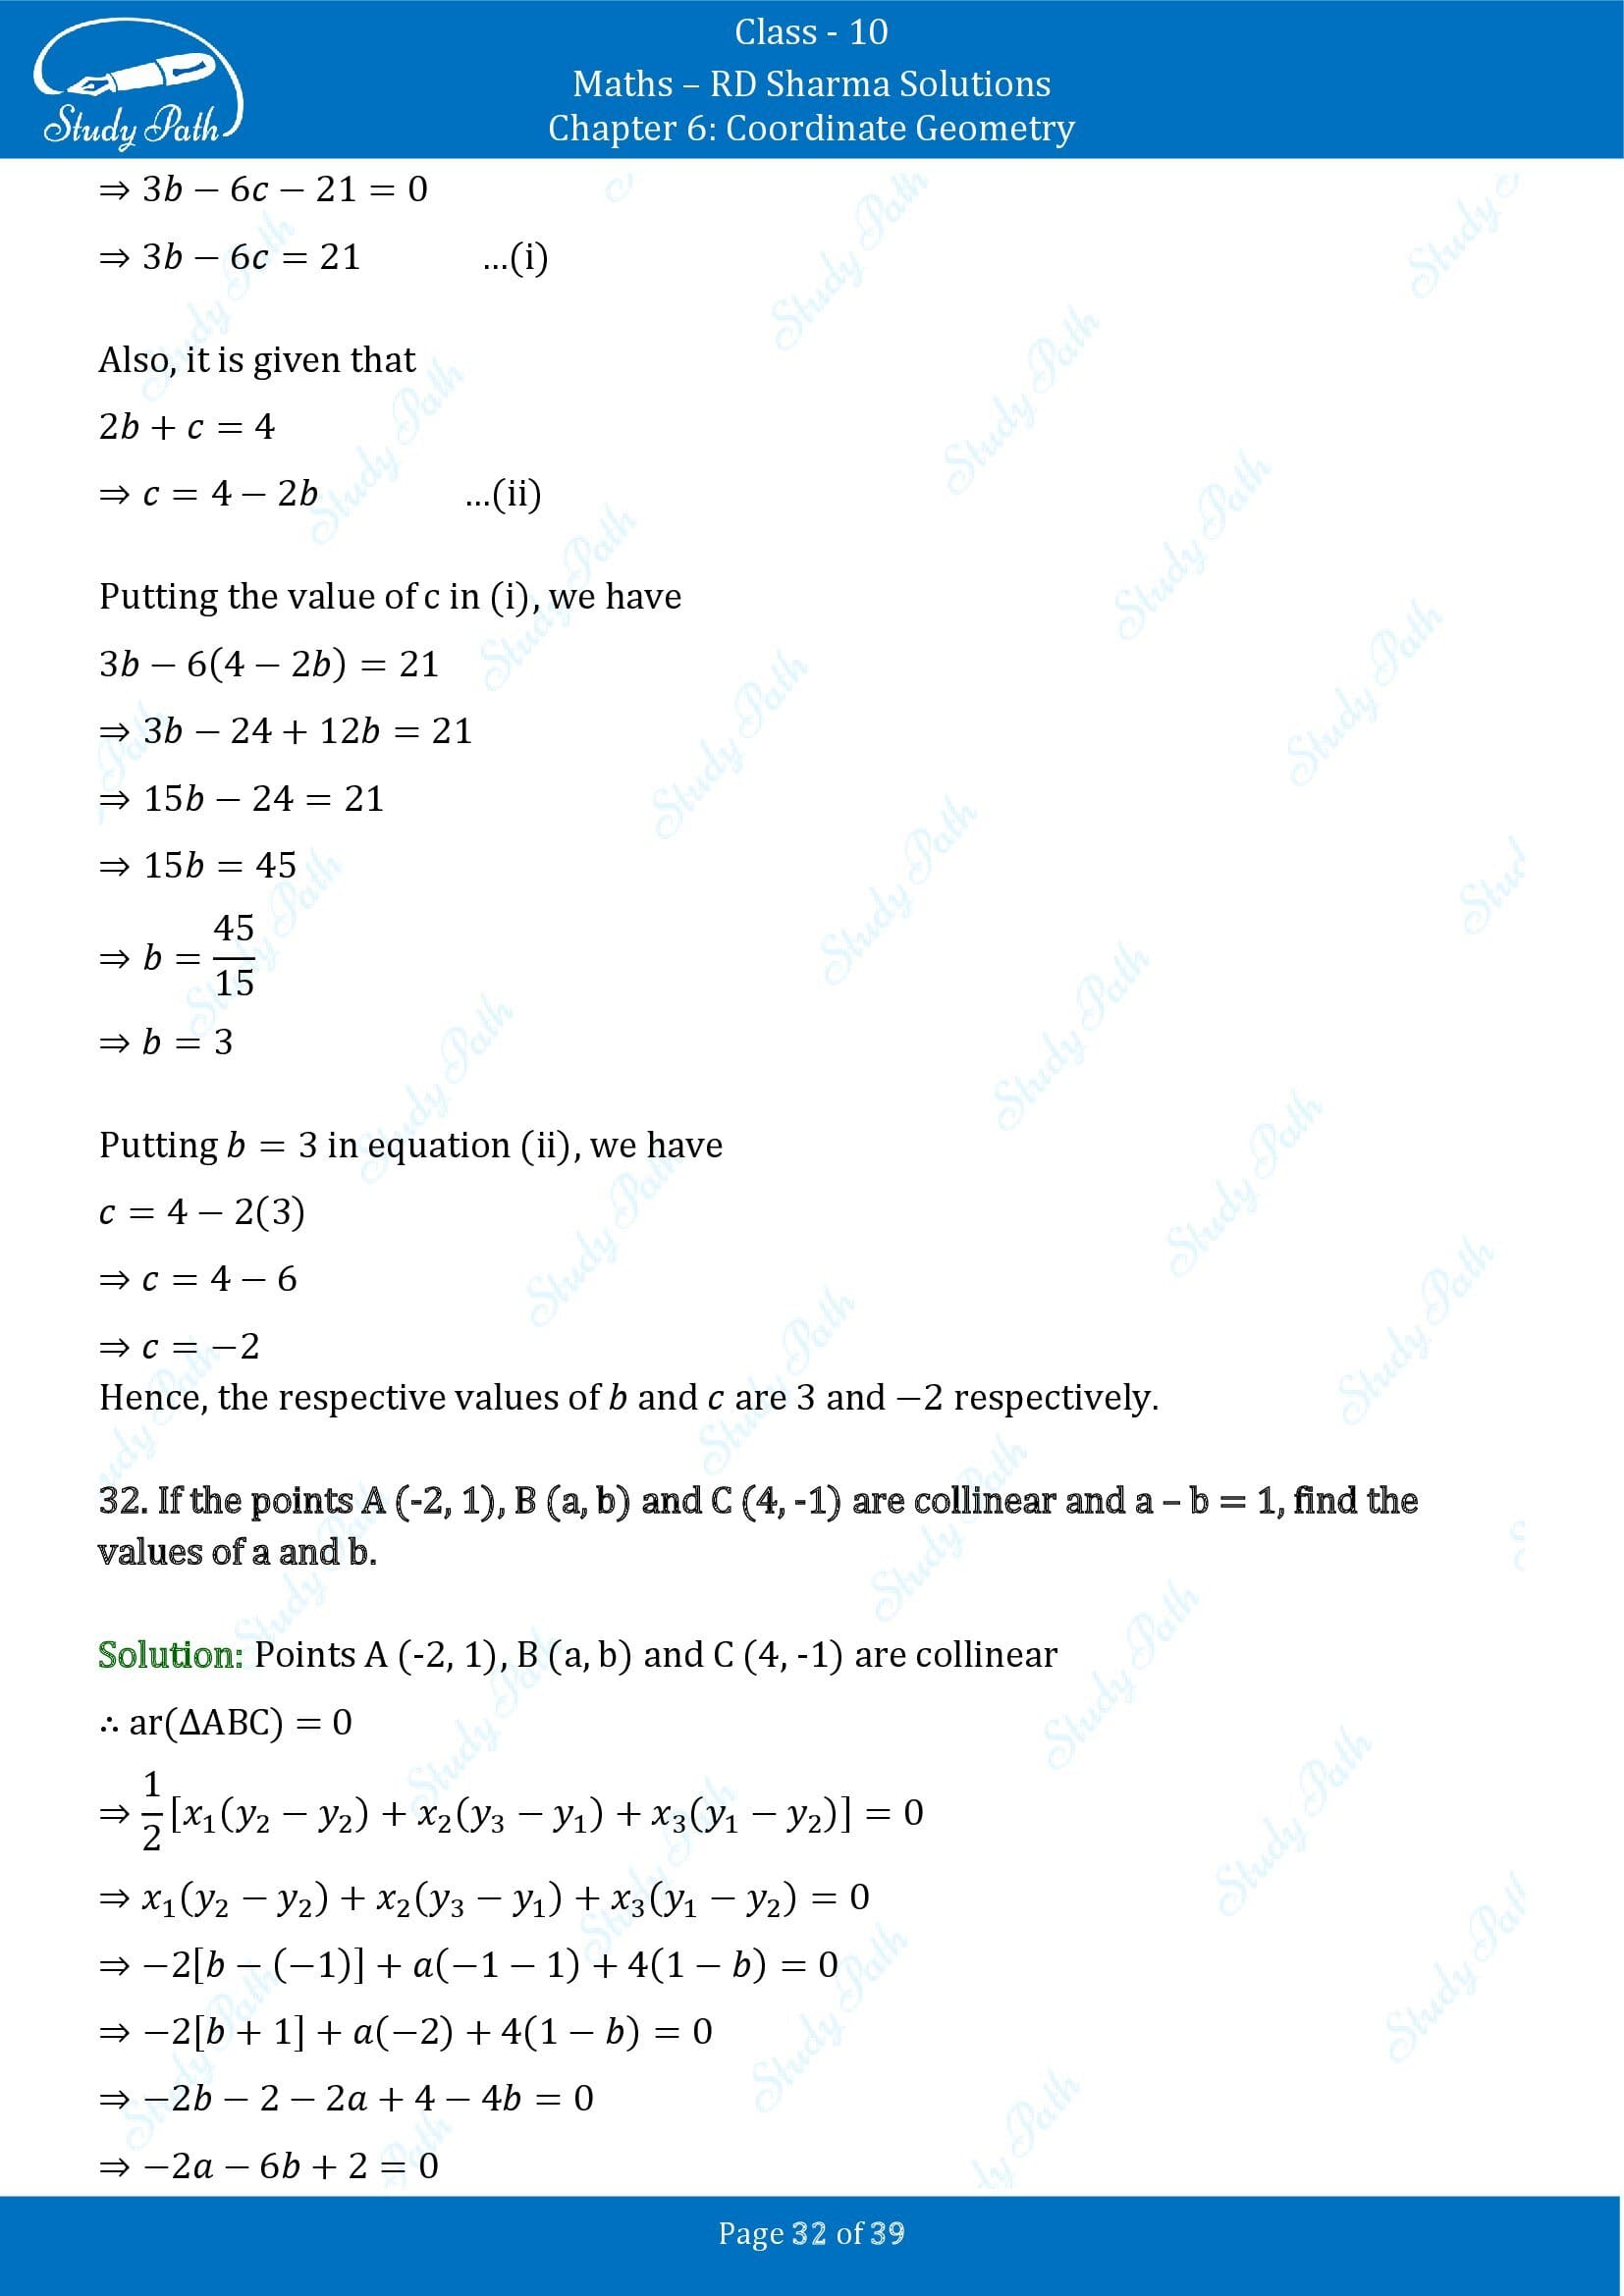 RD Sharma Solutions Class 10 Chapter 6 Coordinate Geometry Exercise 6.5 0032